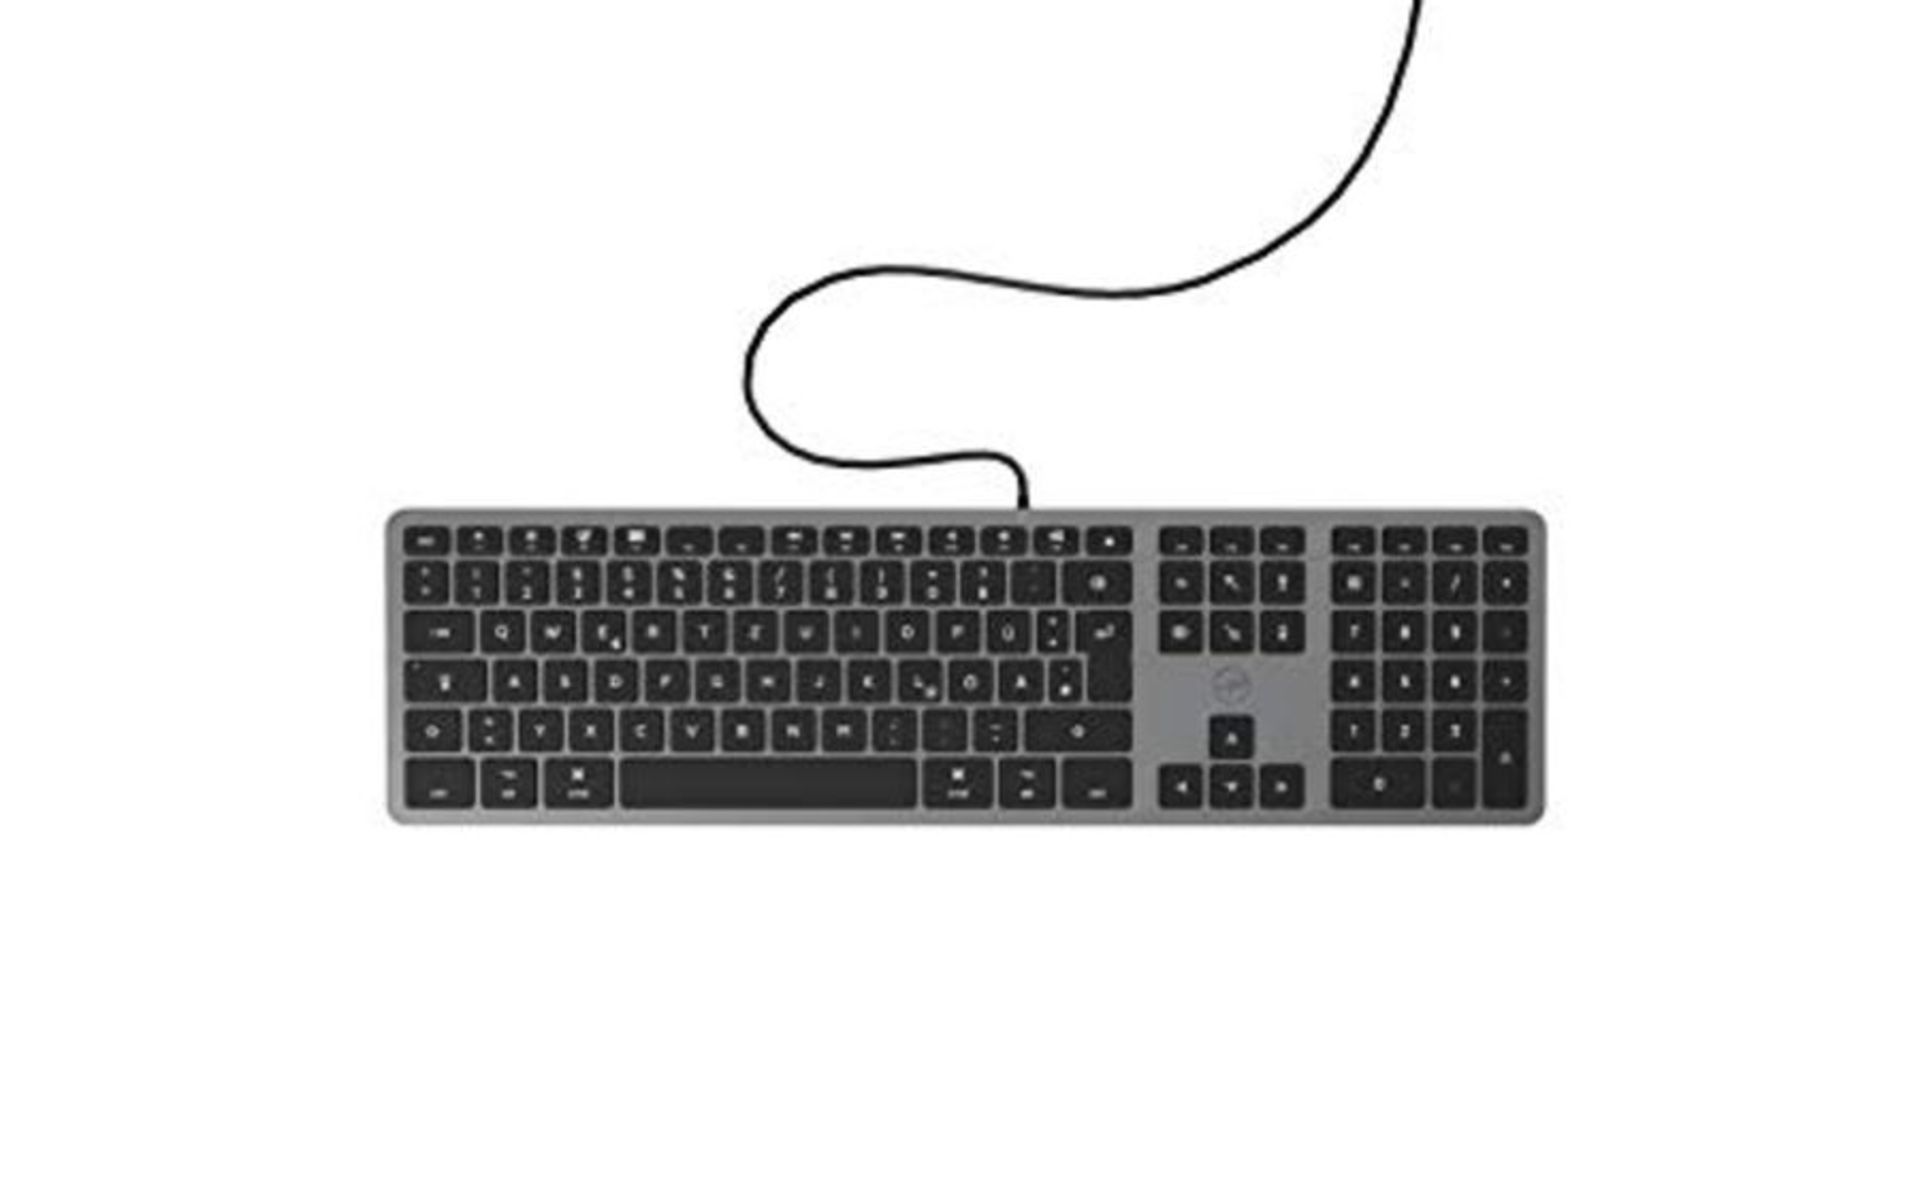 Mobility Lab ML311883 Wired Keyboard with German QWERTZ Keyboard Layout for Mac - Blac